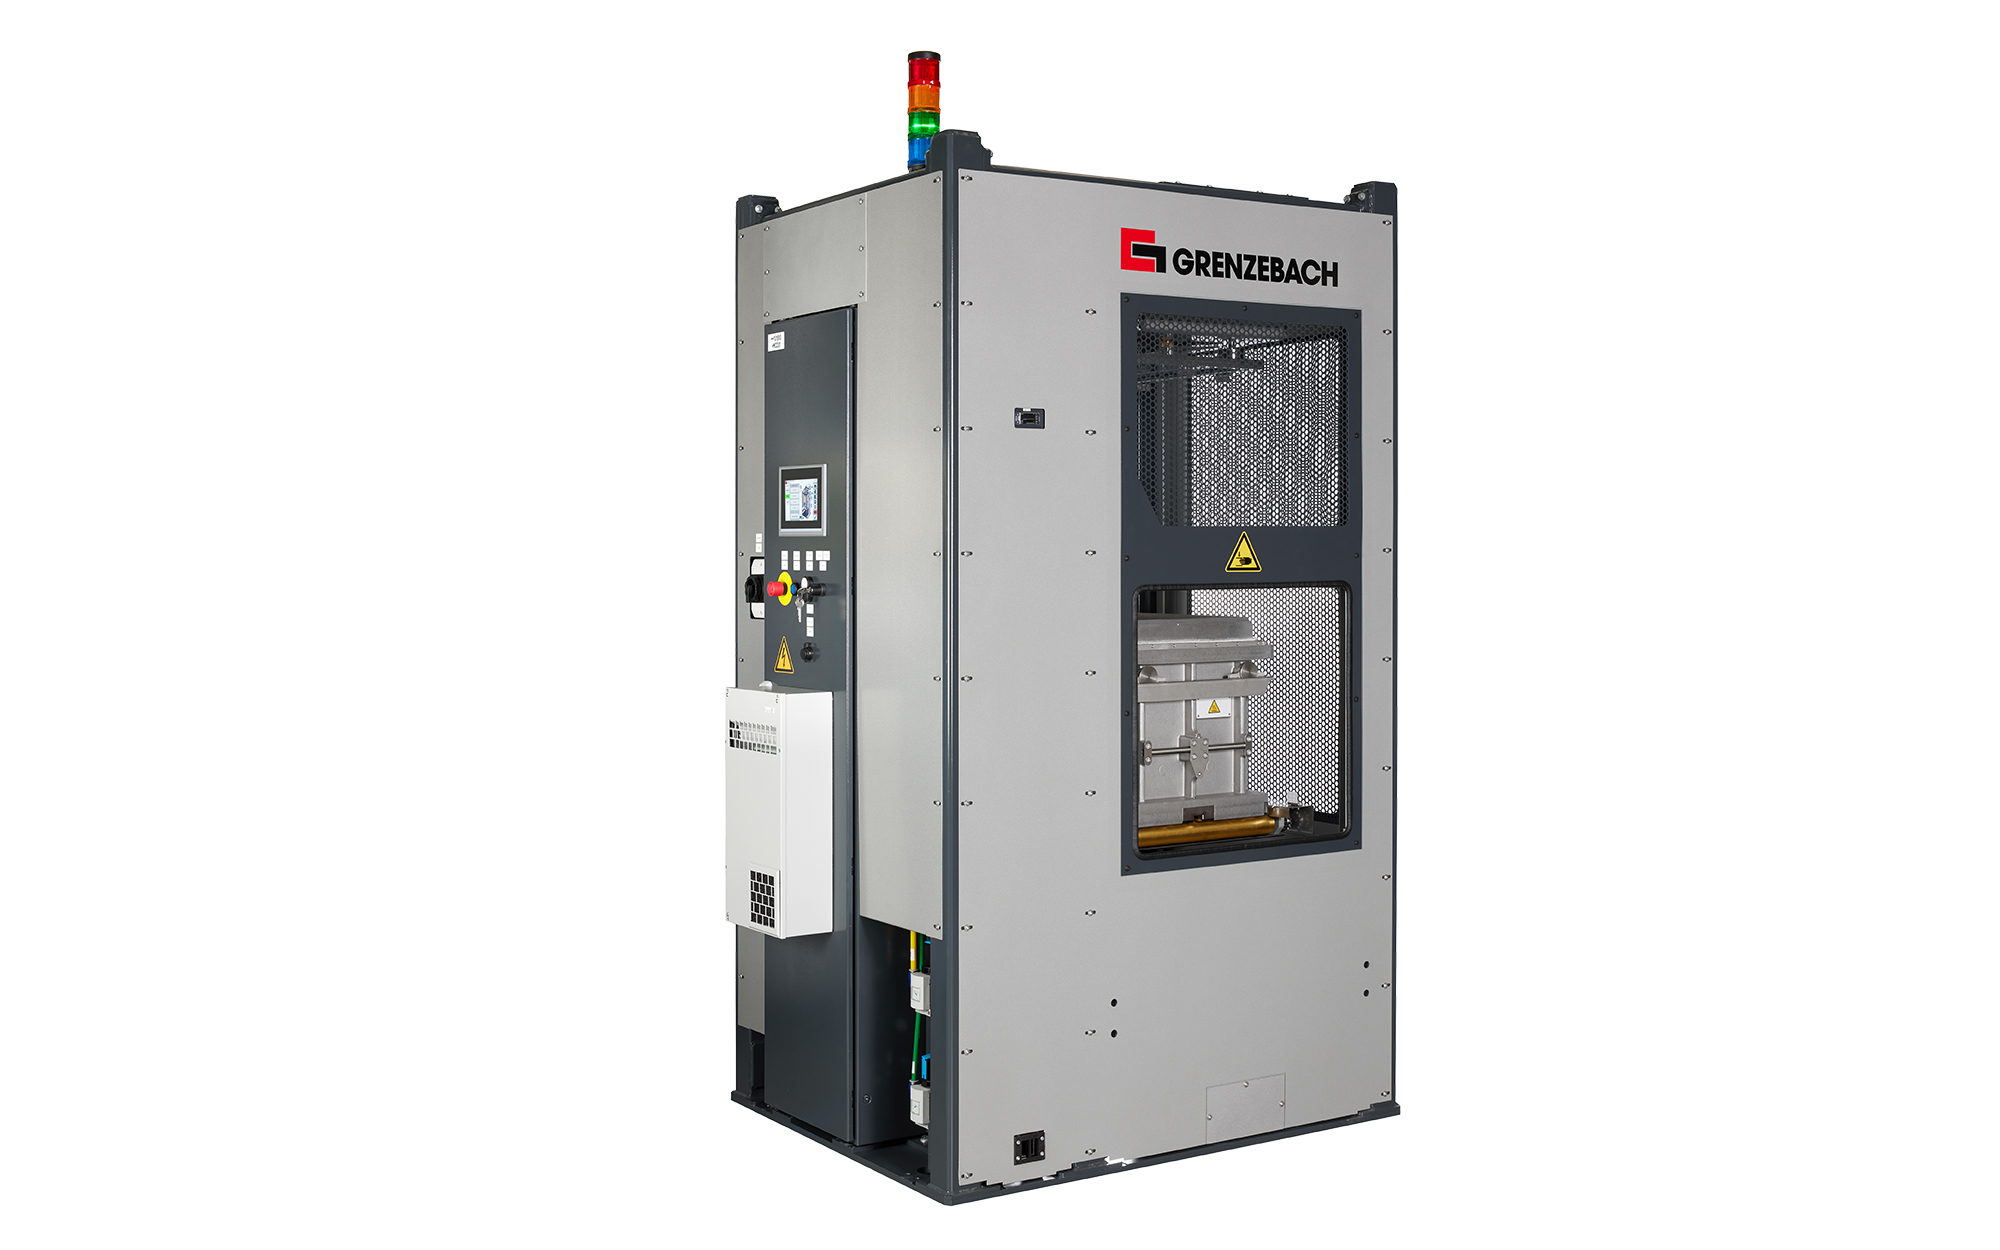 Grenzebachs Exchange P 500/2 solution for polymer AM